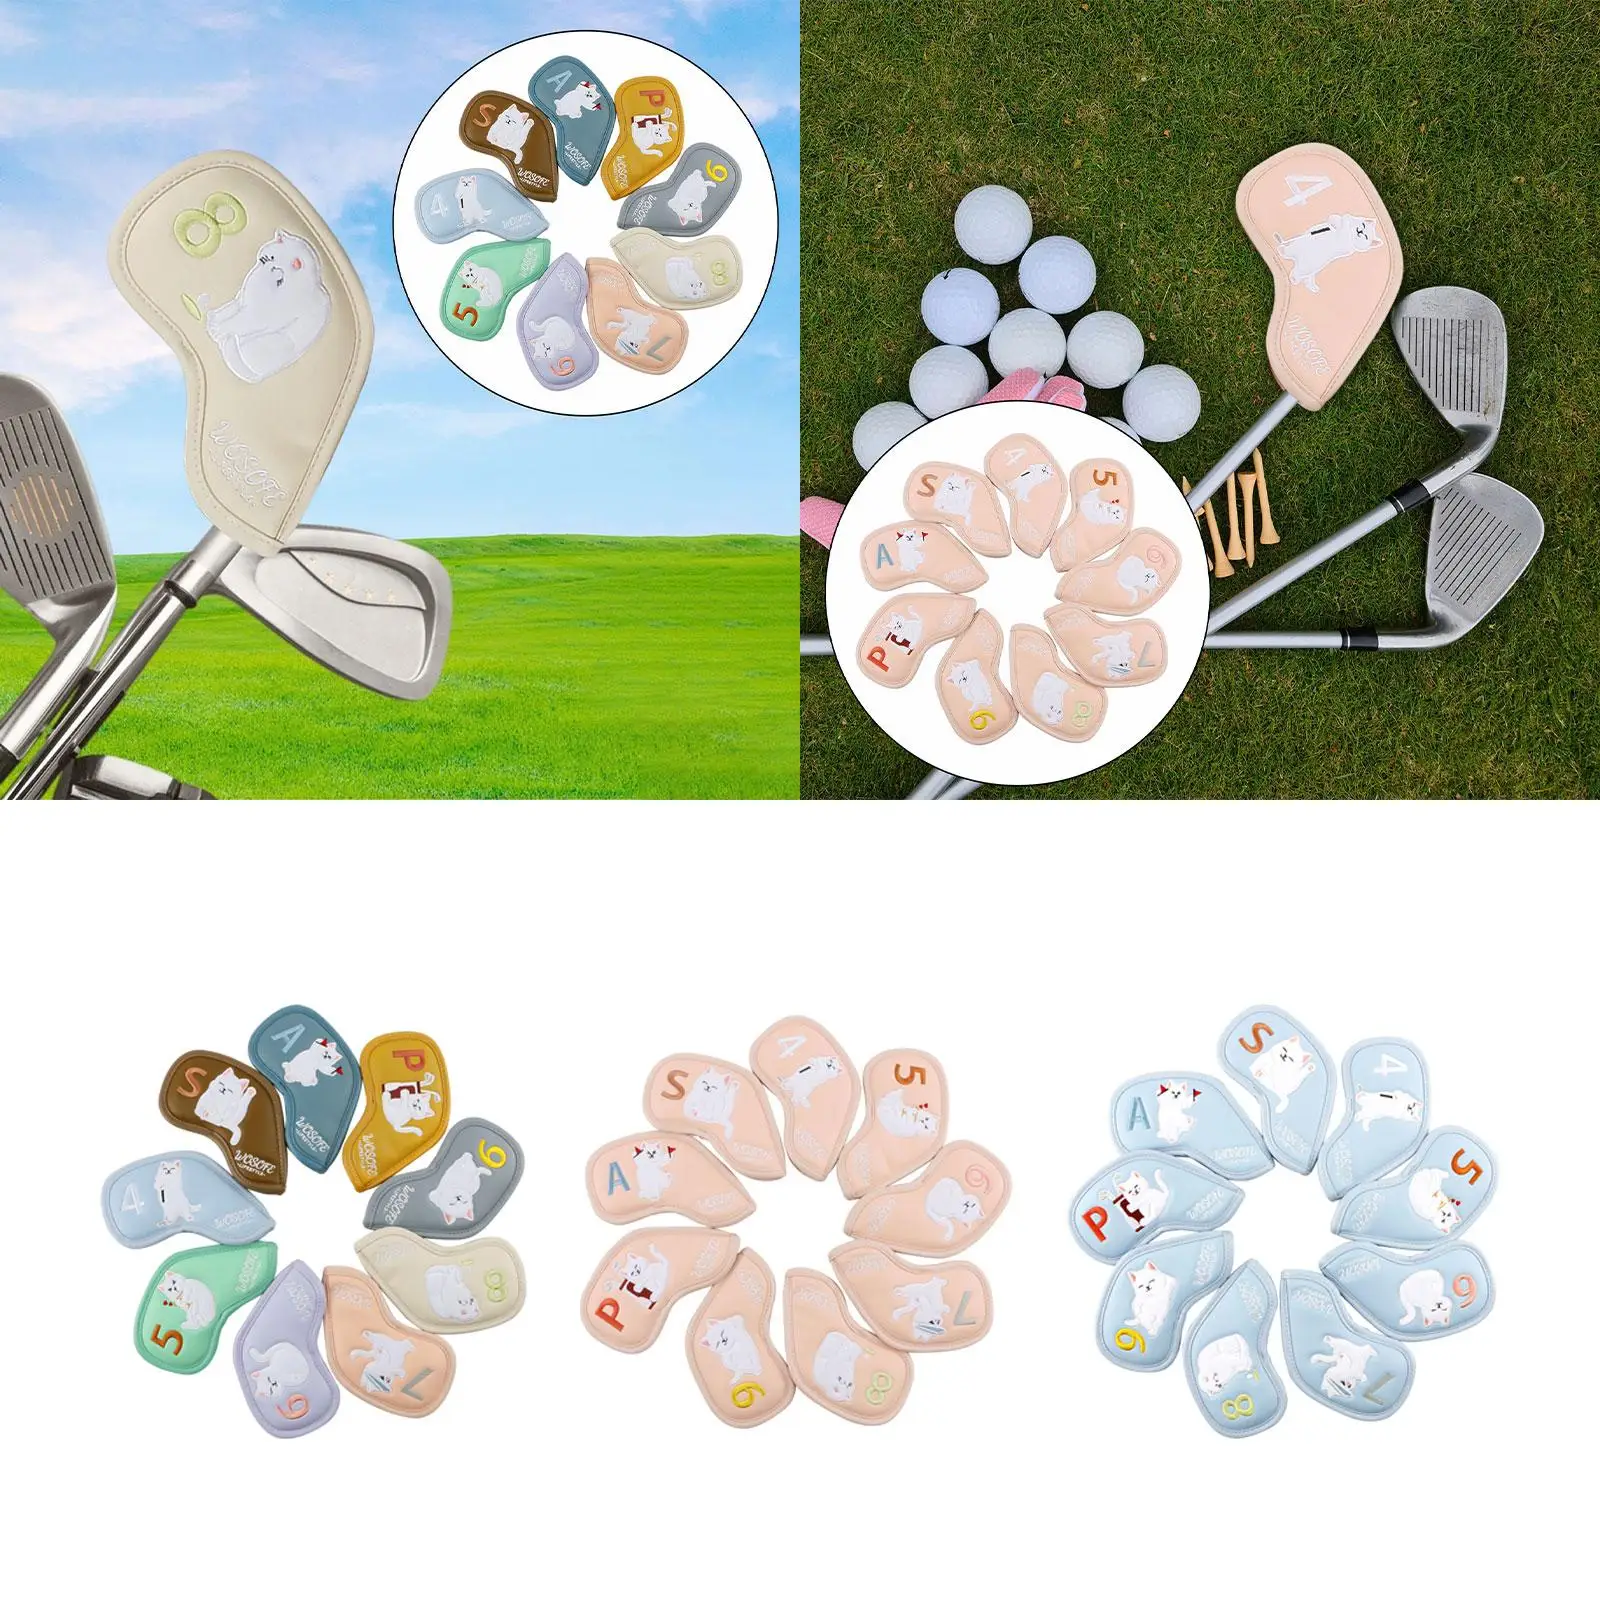 9Pcs Golf Iron Covers Set Golf Club Headcovers 4,5,6,7,8,9,A,S,P PU Leather